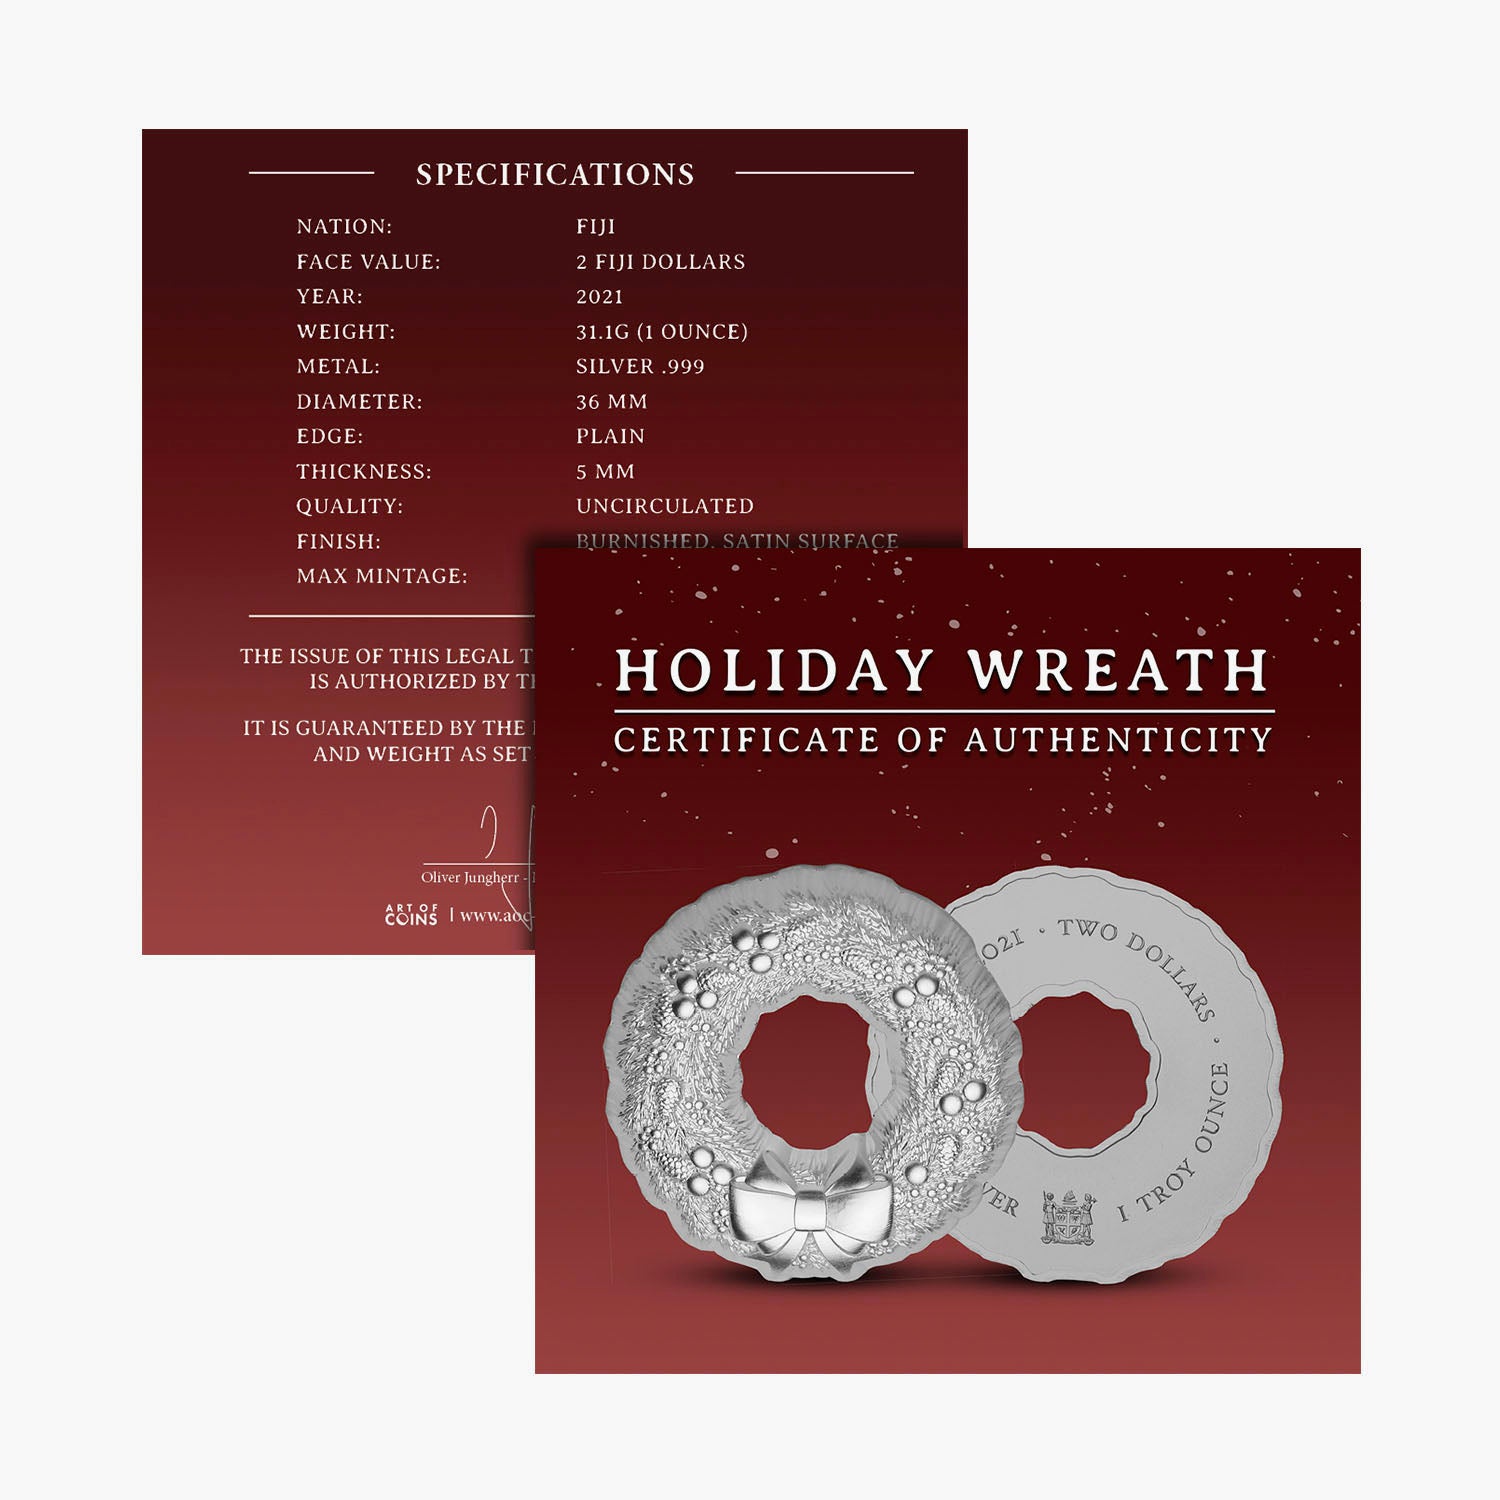 The Christmas Holiday Wreath .999 Silver Coin